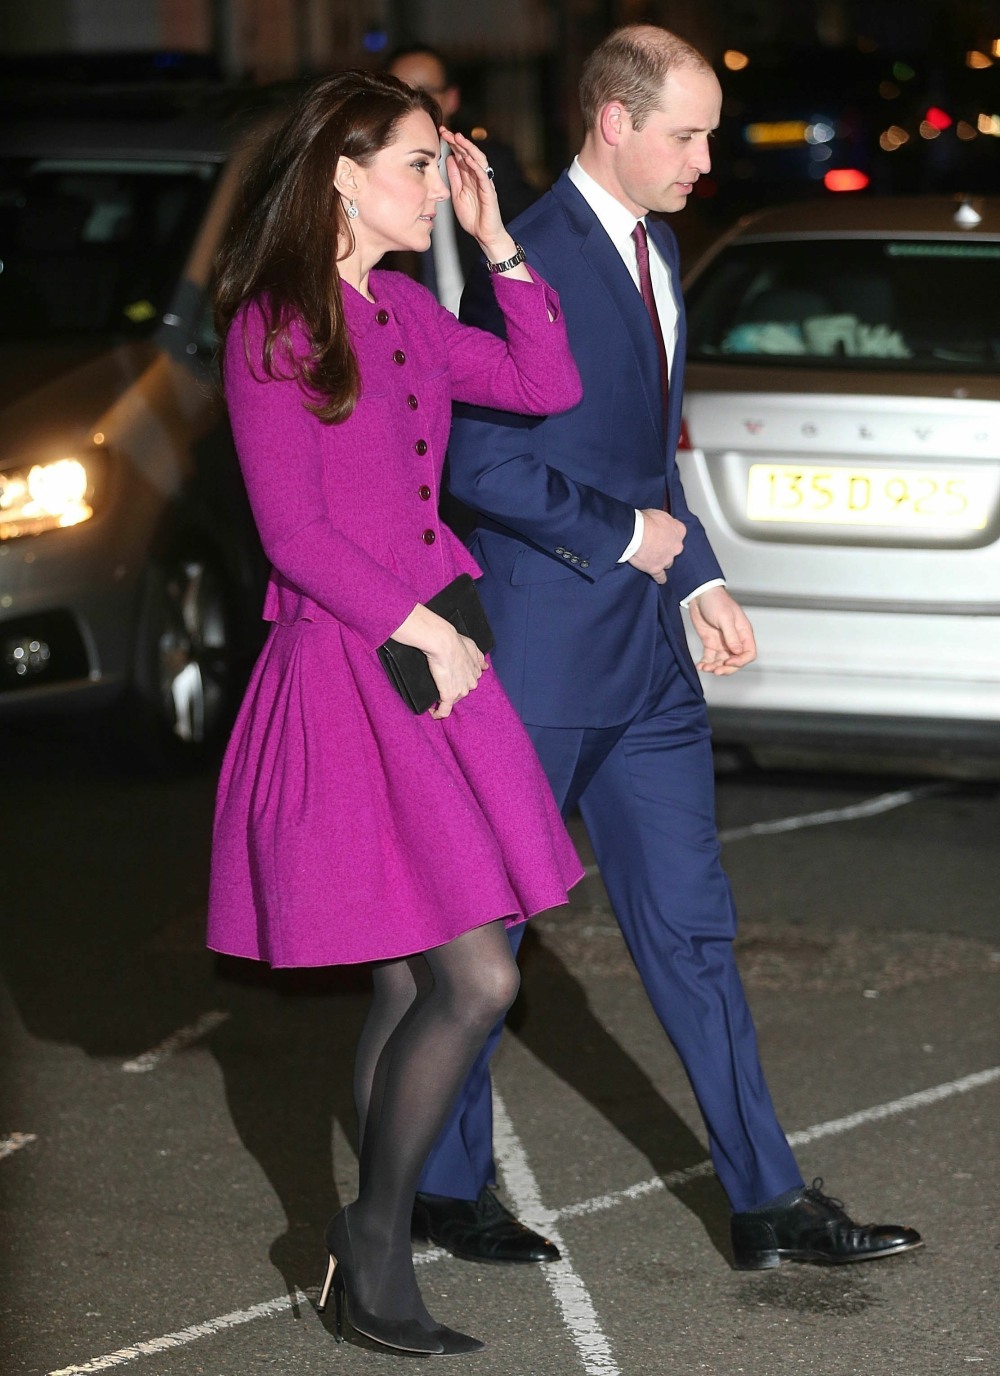 The Duke And Duchess Of Cambridge Arrive At A Health Writers Conference In London